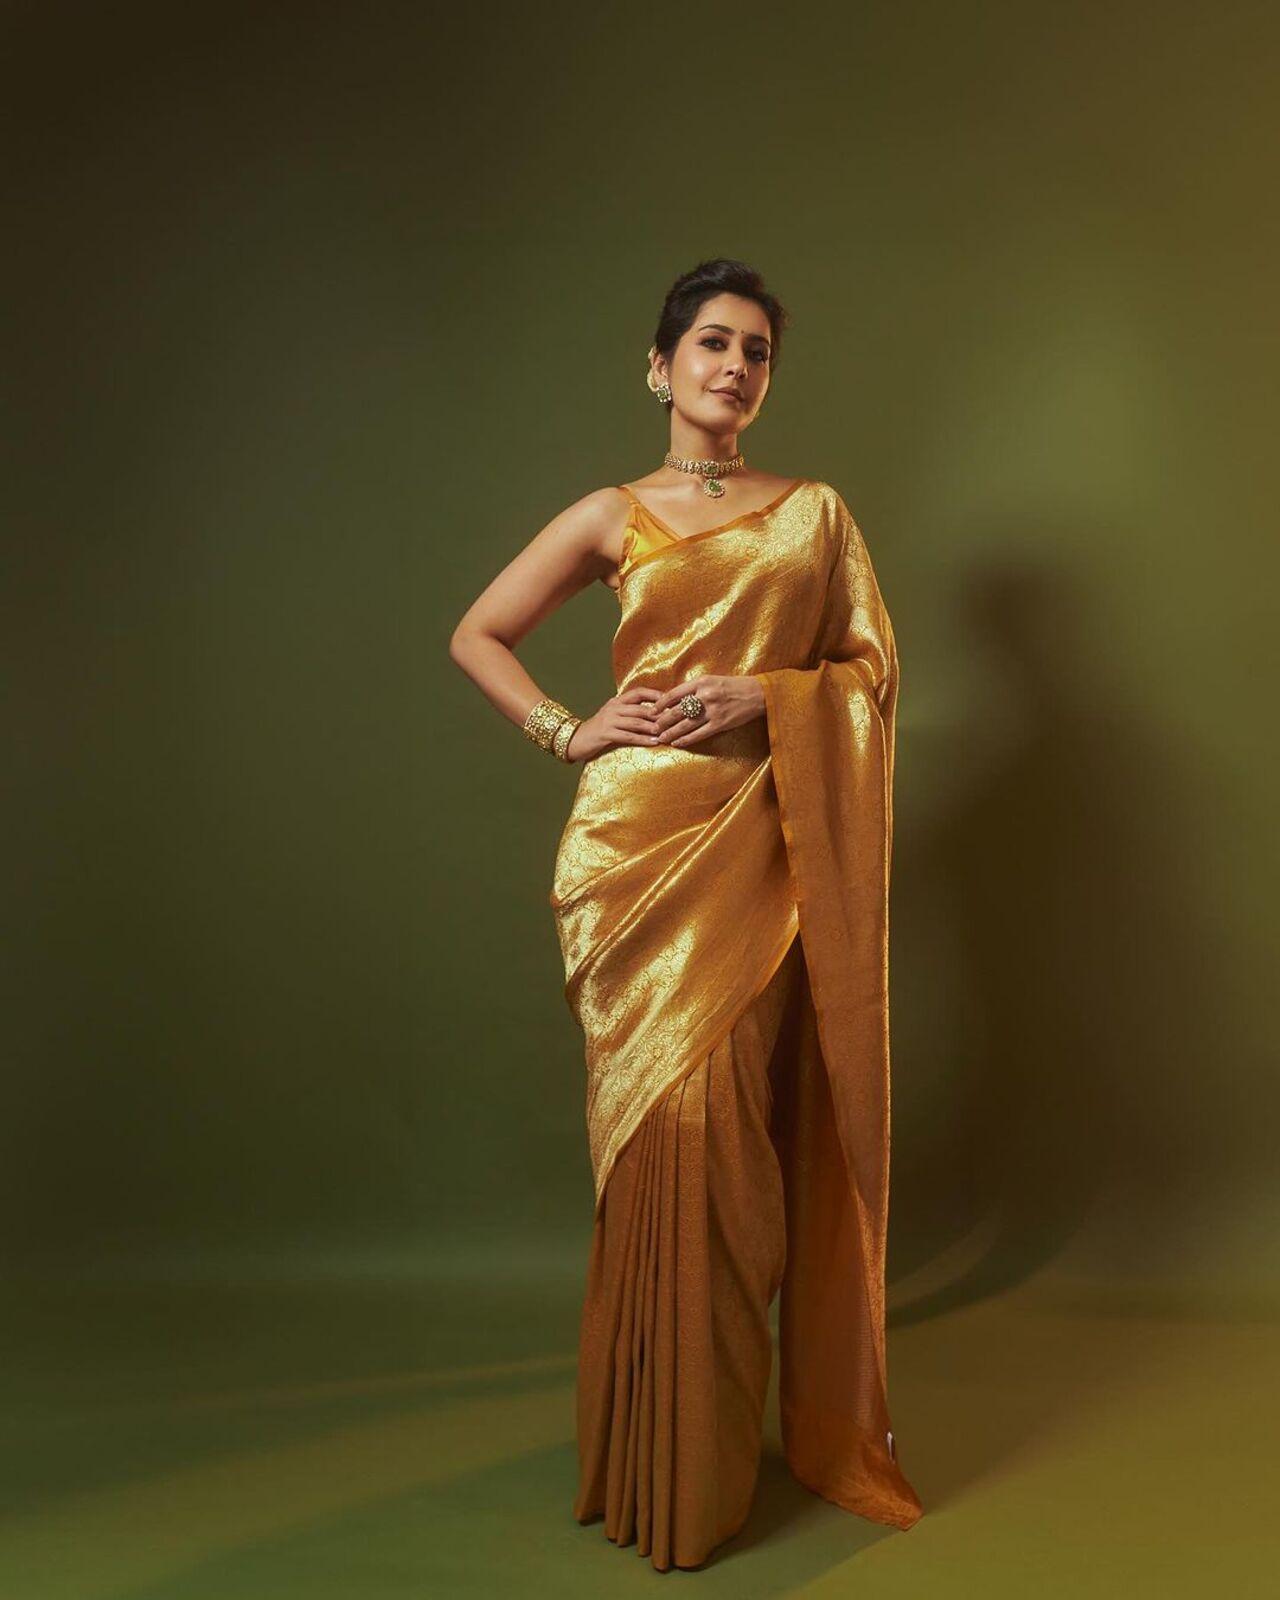 The OG Gold! How can one ever go wrong with monotone sarees. Raashii Khanna looks elegant and graceful in this golden saree paired with traditional accessories and her hair tied in a neat bun